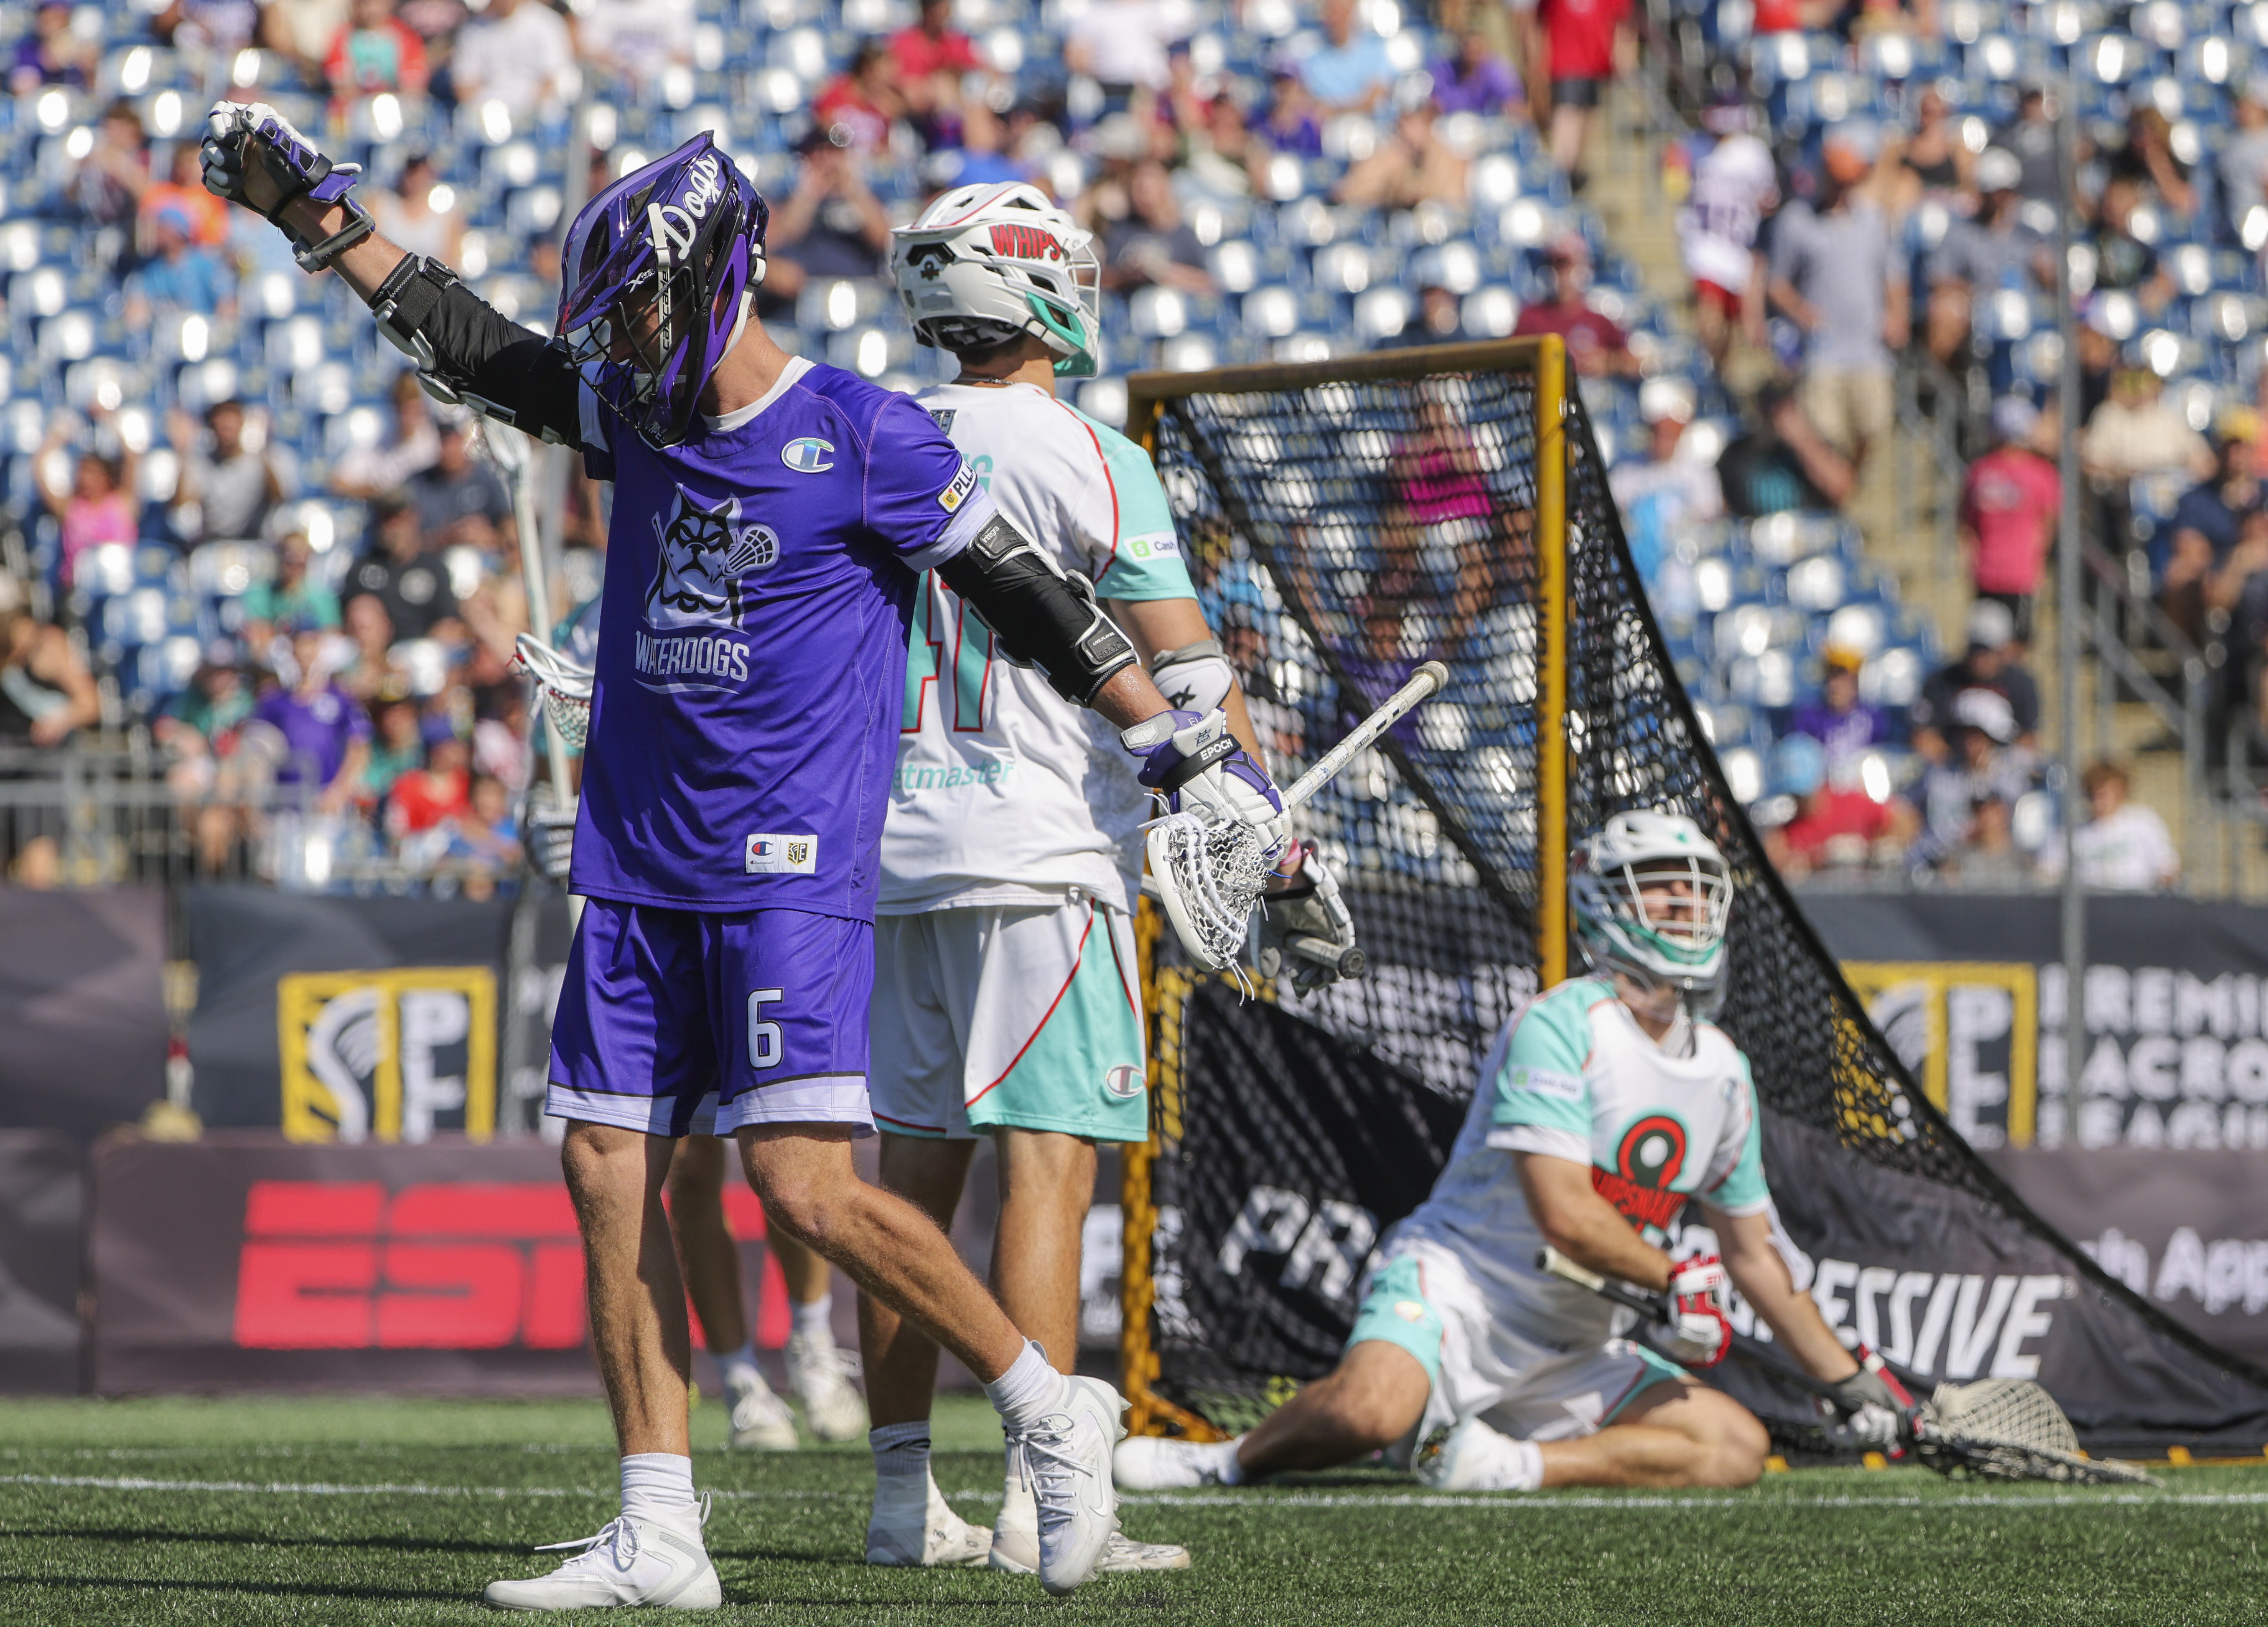 Paul Rabil's Top 9 Greatest Moments - Lacrosse All Stars